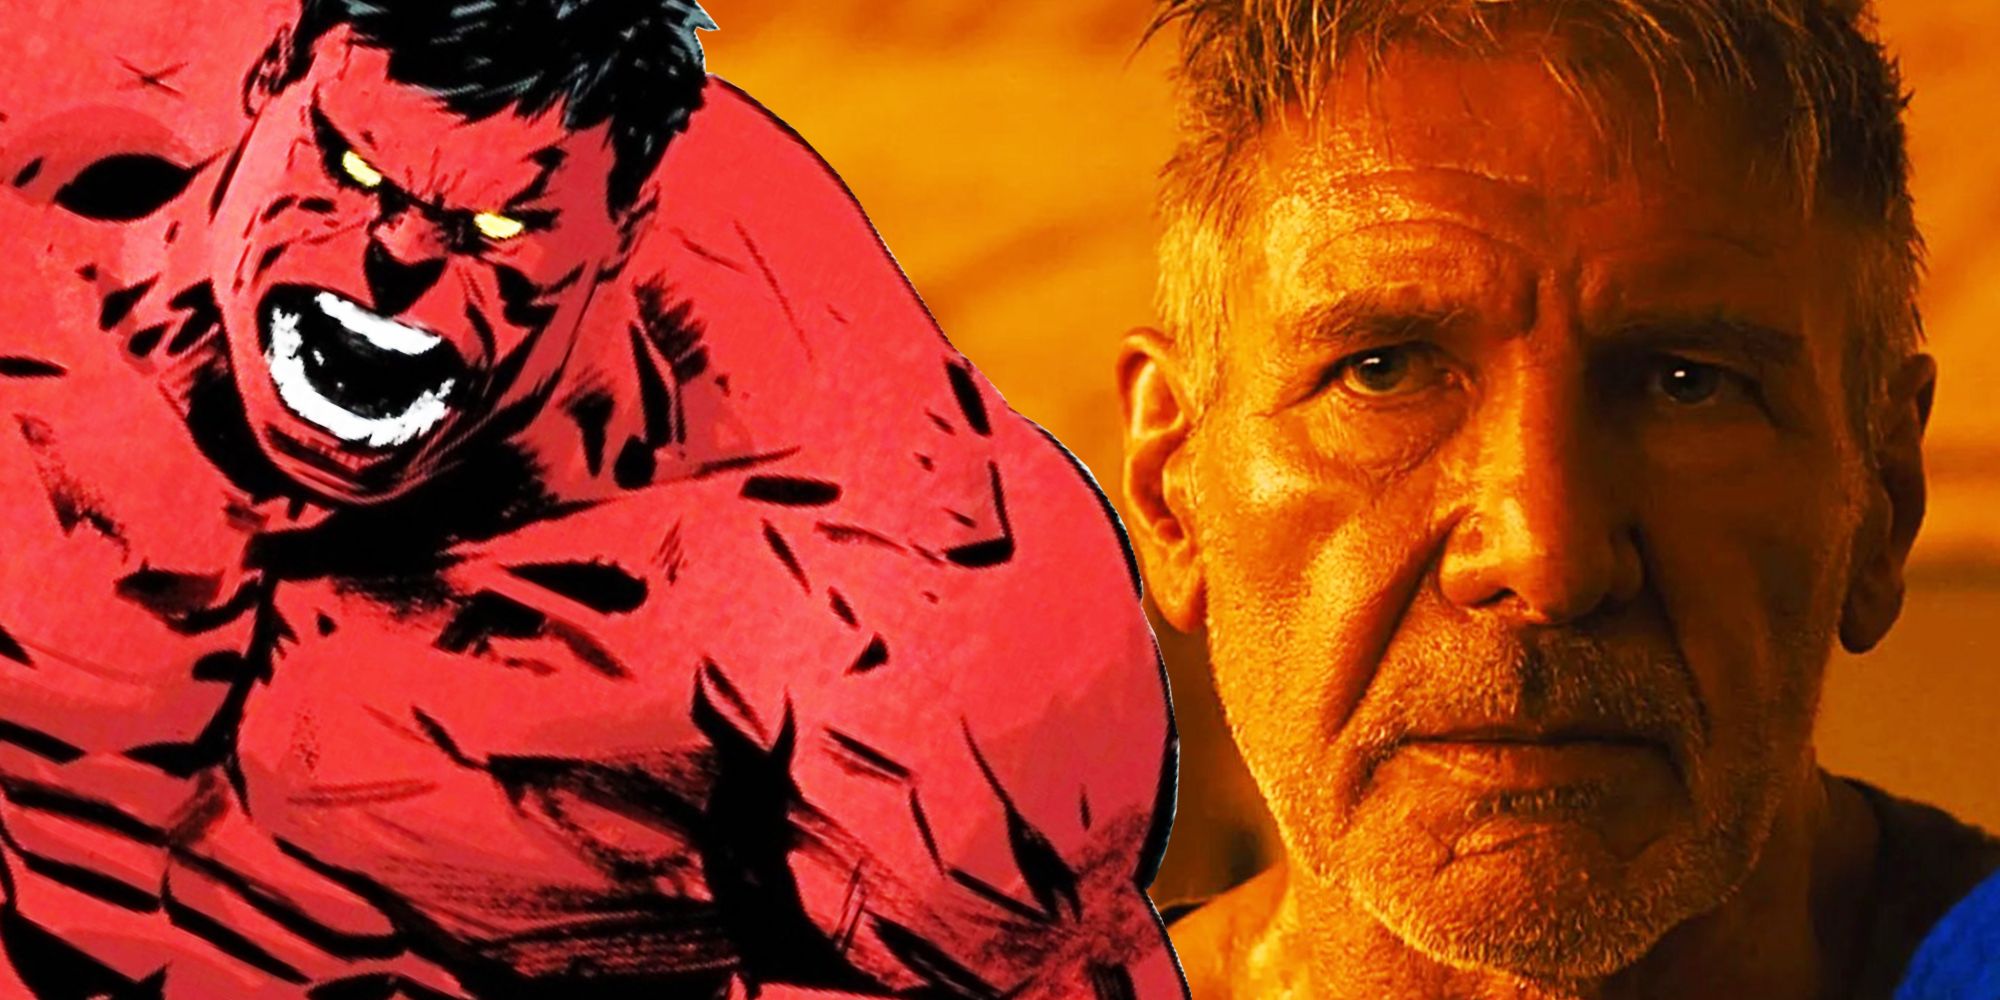 Mixed image of Harrison Ford as neutral looking Deckard in Blade Runner 2049 and a comic book Red Hulk looking angry